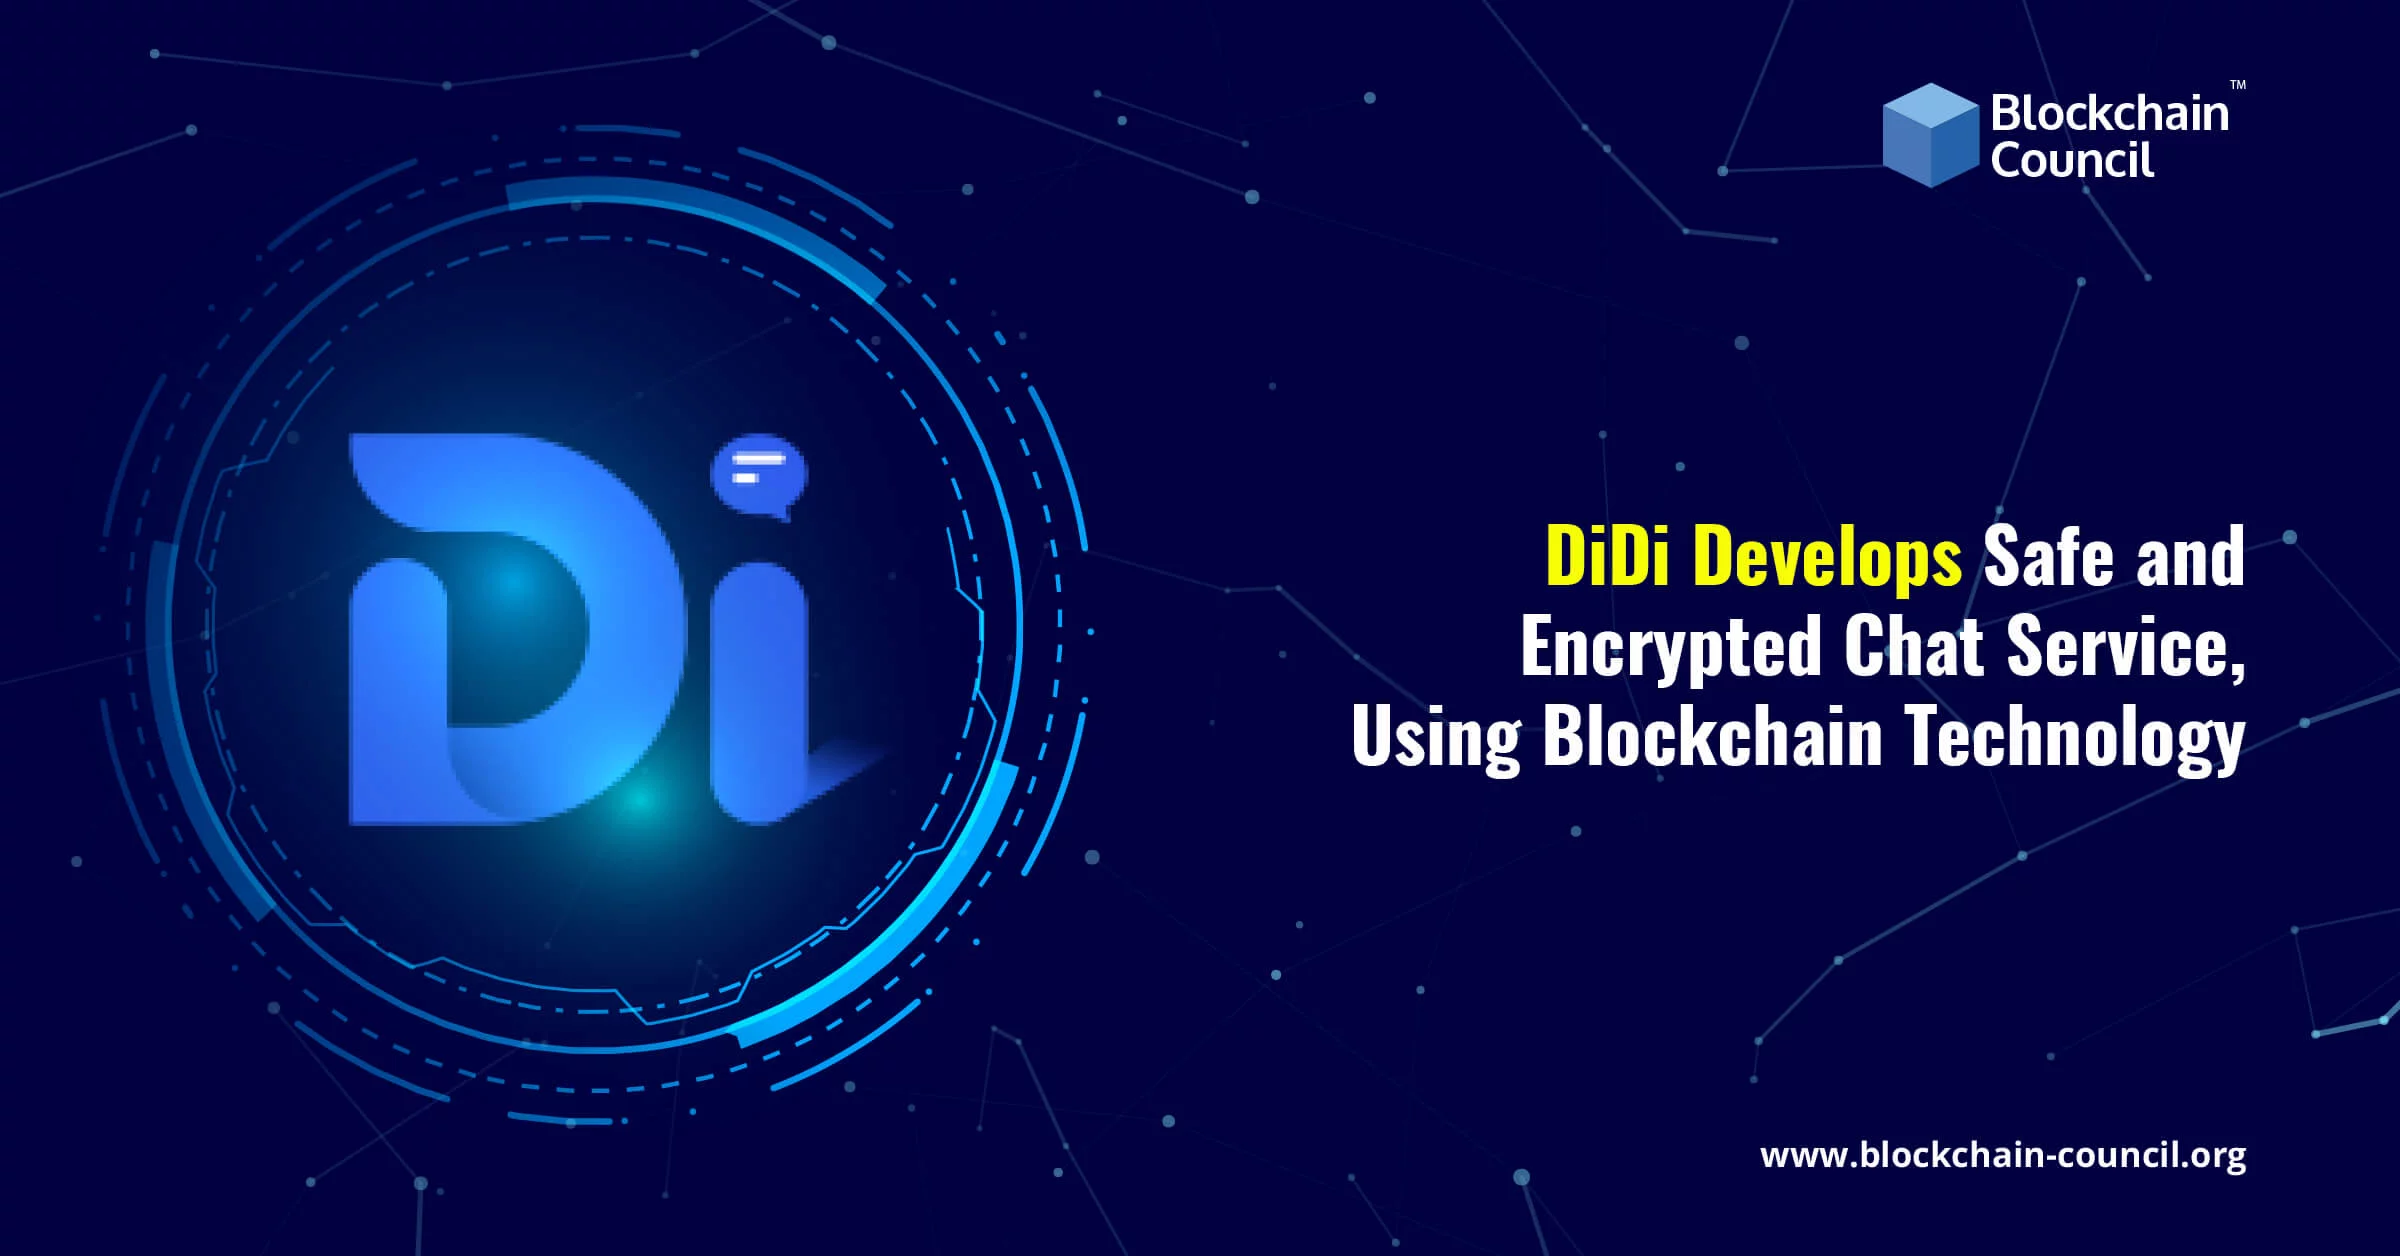 DiDi Develops Safe and Encrypted Chat Service, Using Blockchain Technology